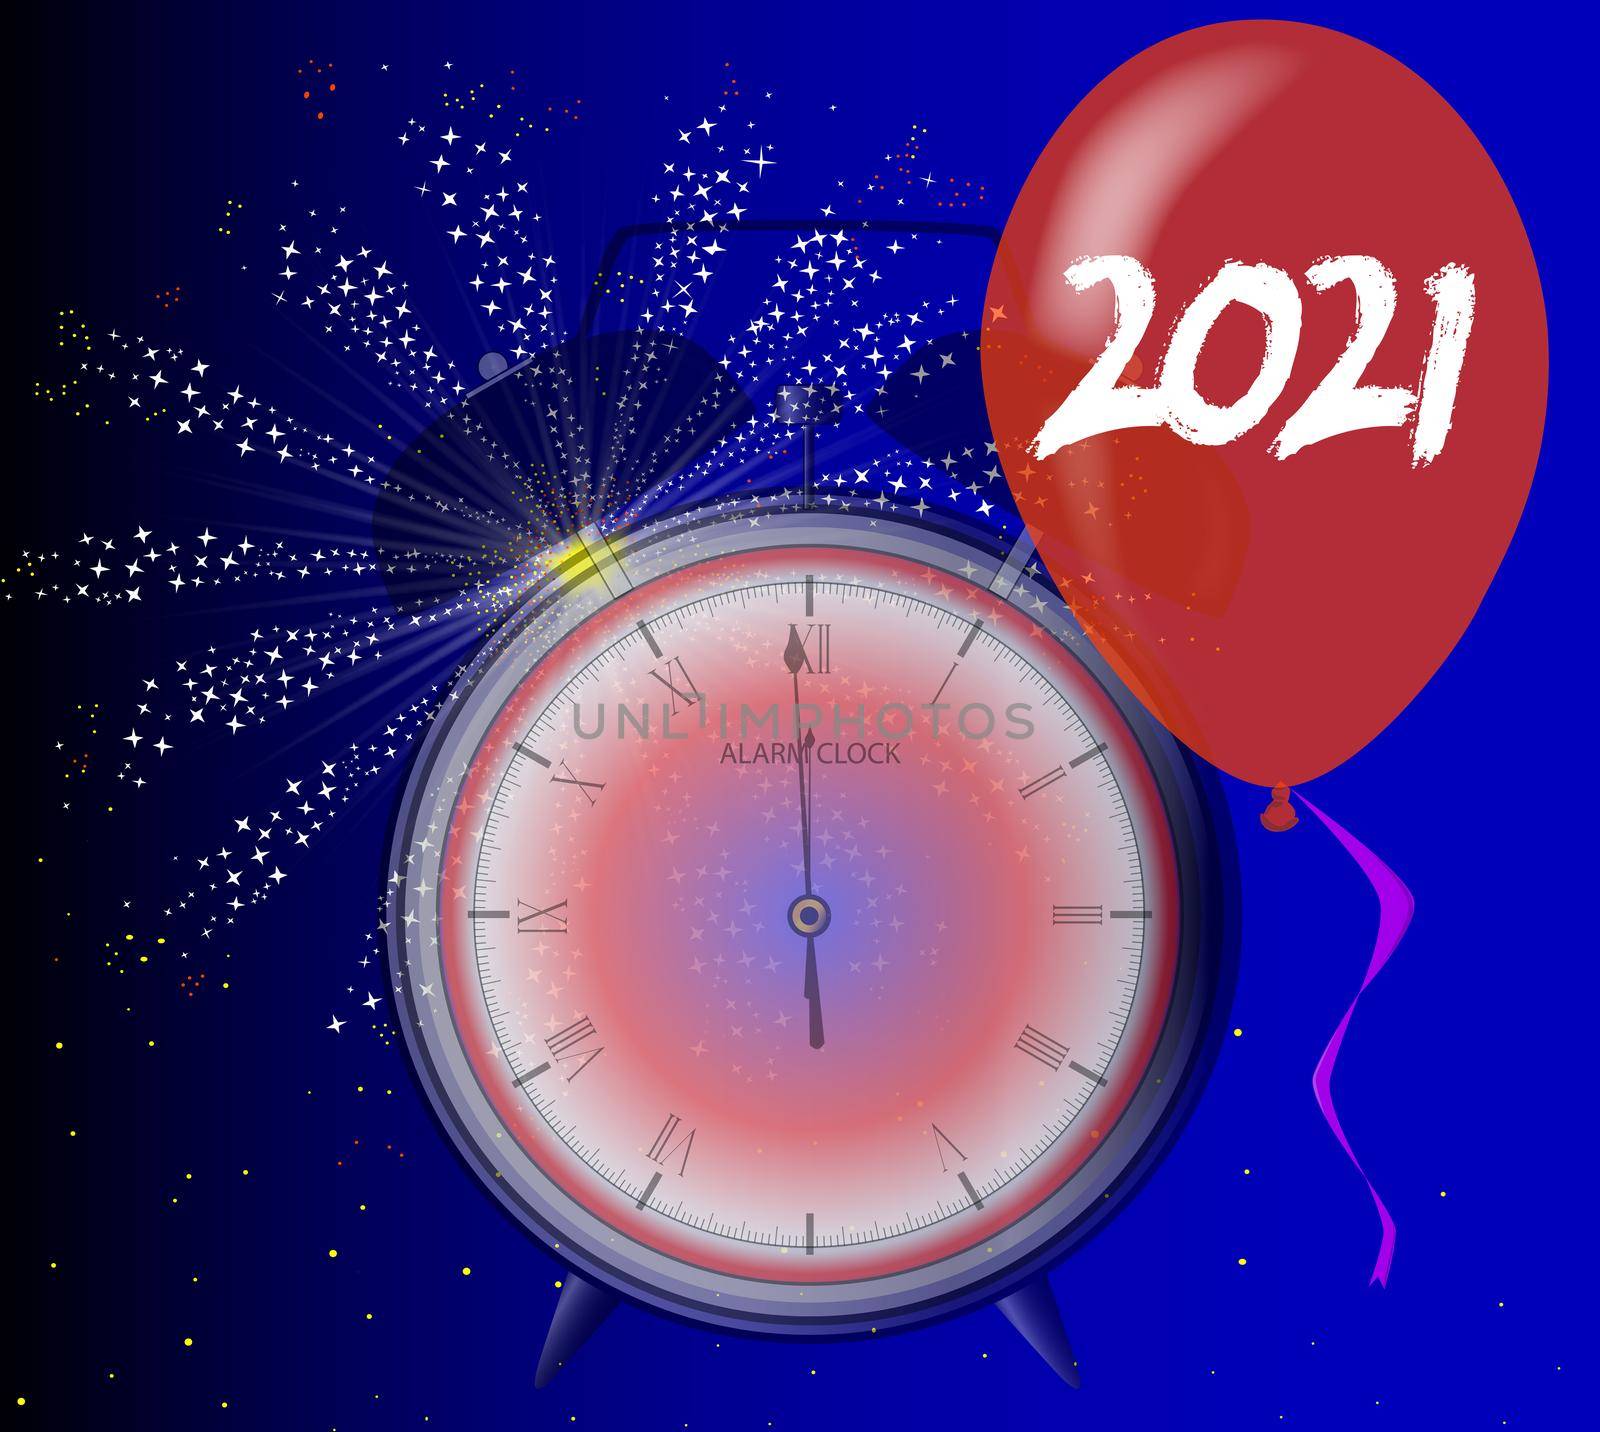 A 2021 midnight celebration clock with balloon and firework explosion.